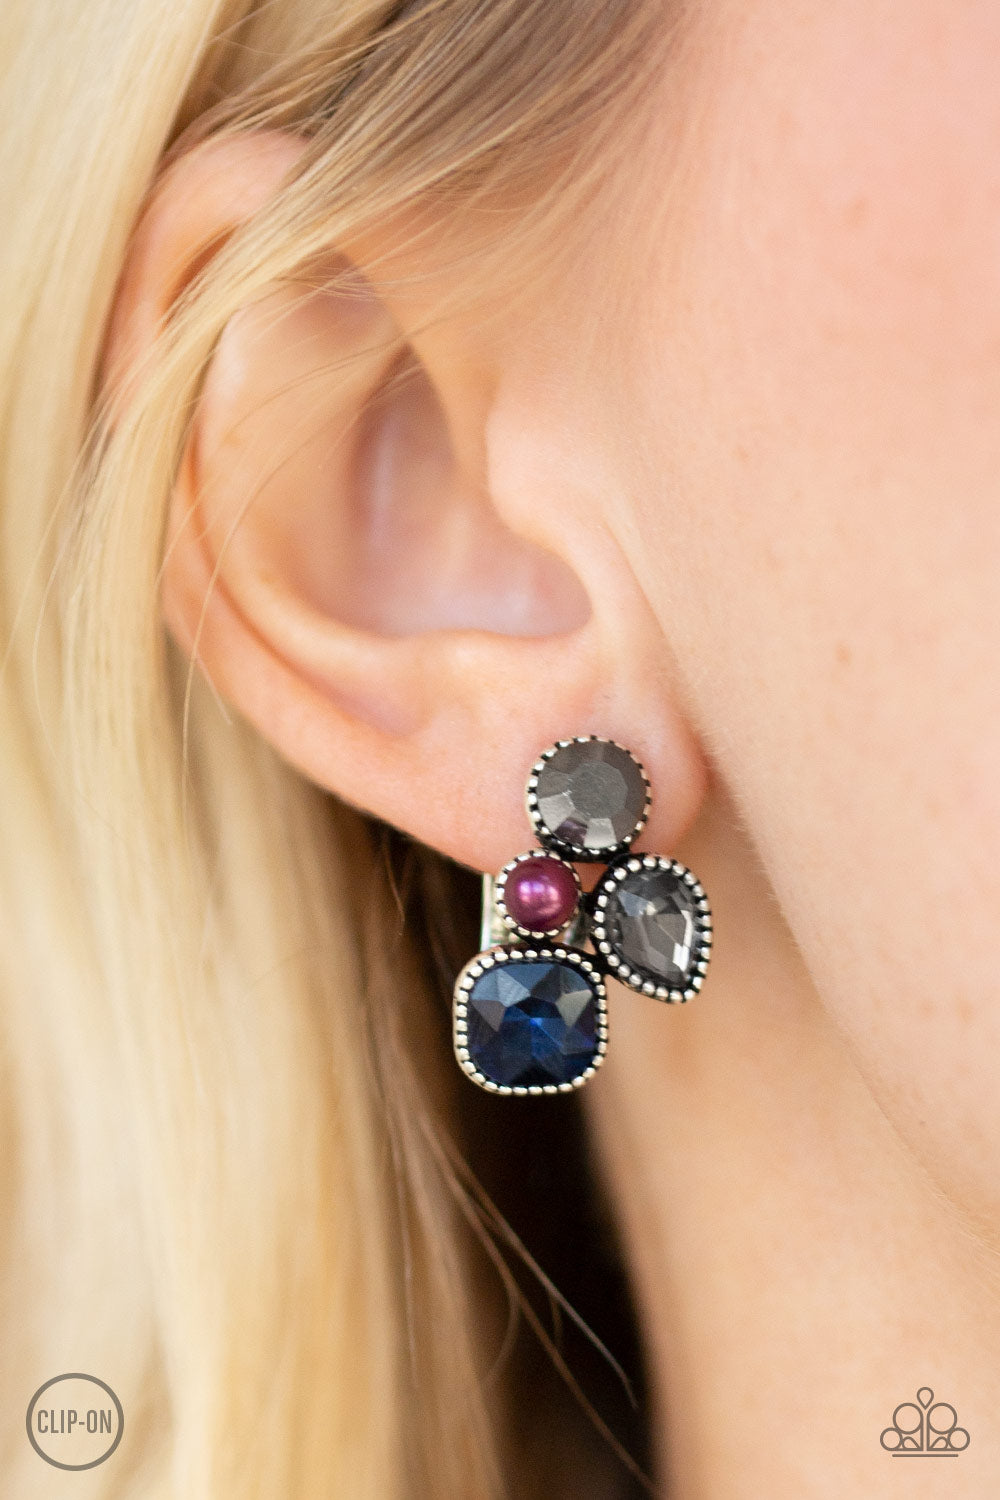 Super Superstar Multi Clip-On Earring - Paparazzi Accessories  Infused with a dainty purple pearl, mismatched blue, smoky, and hematite rhinestones coalesce into a glittery frame. Earring attaches to a standard clip-on fitting.   All Paparazzi Accessories are lead free and nickel free!  Sold as one pair of clip-on earrings.